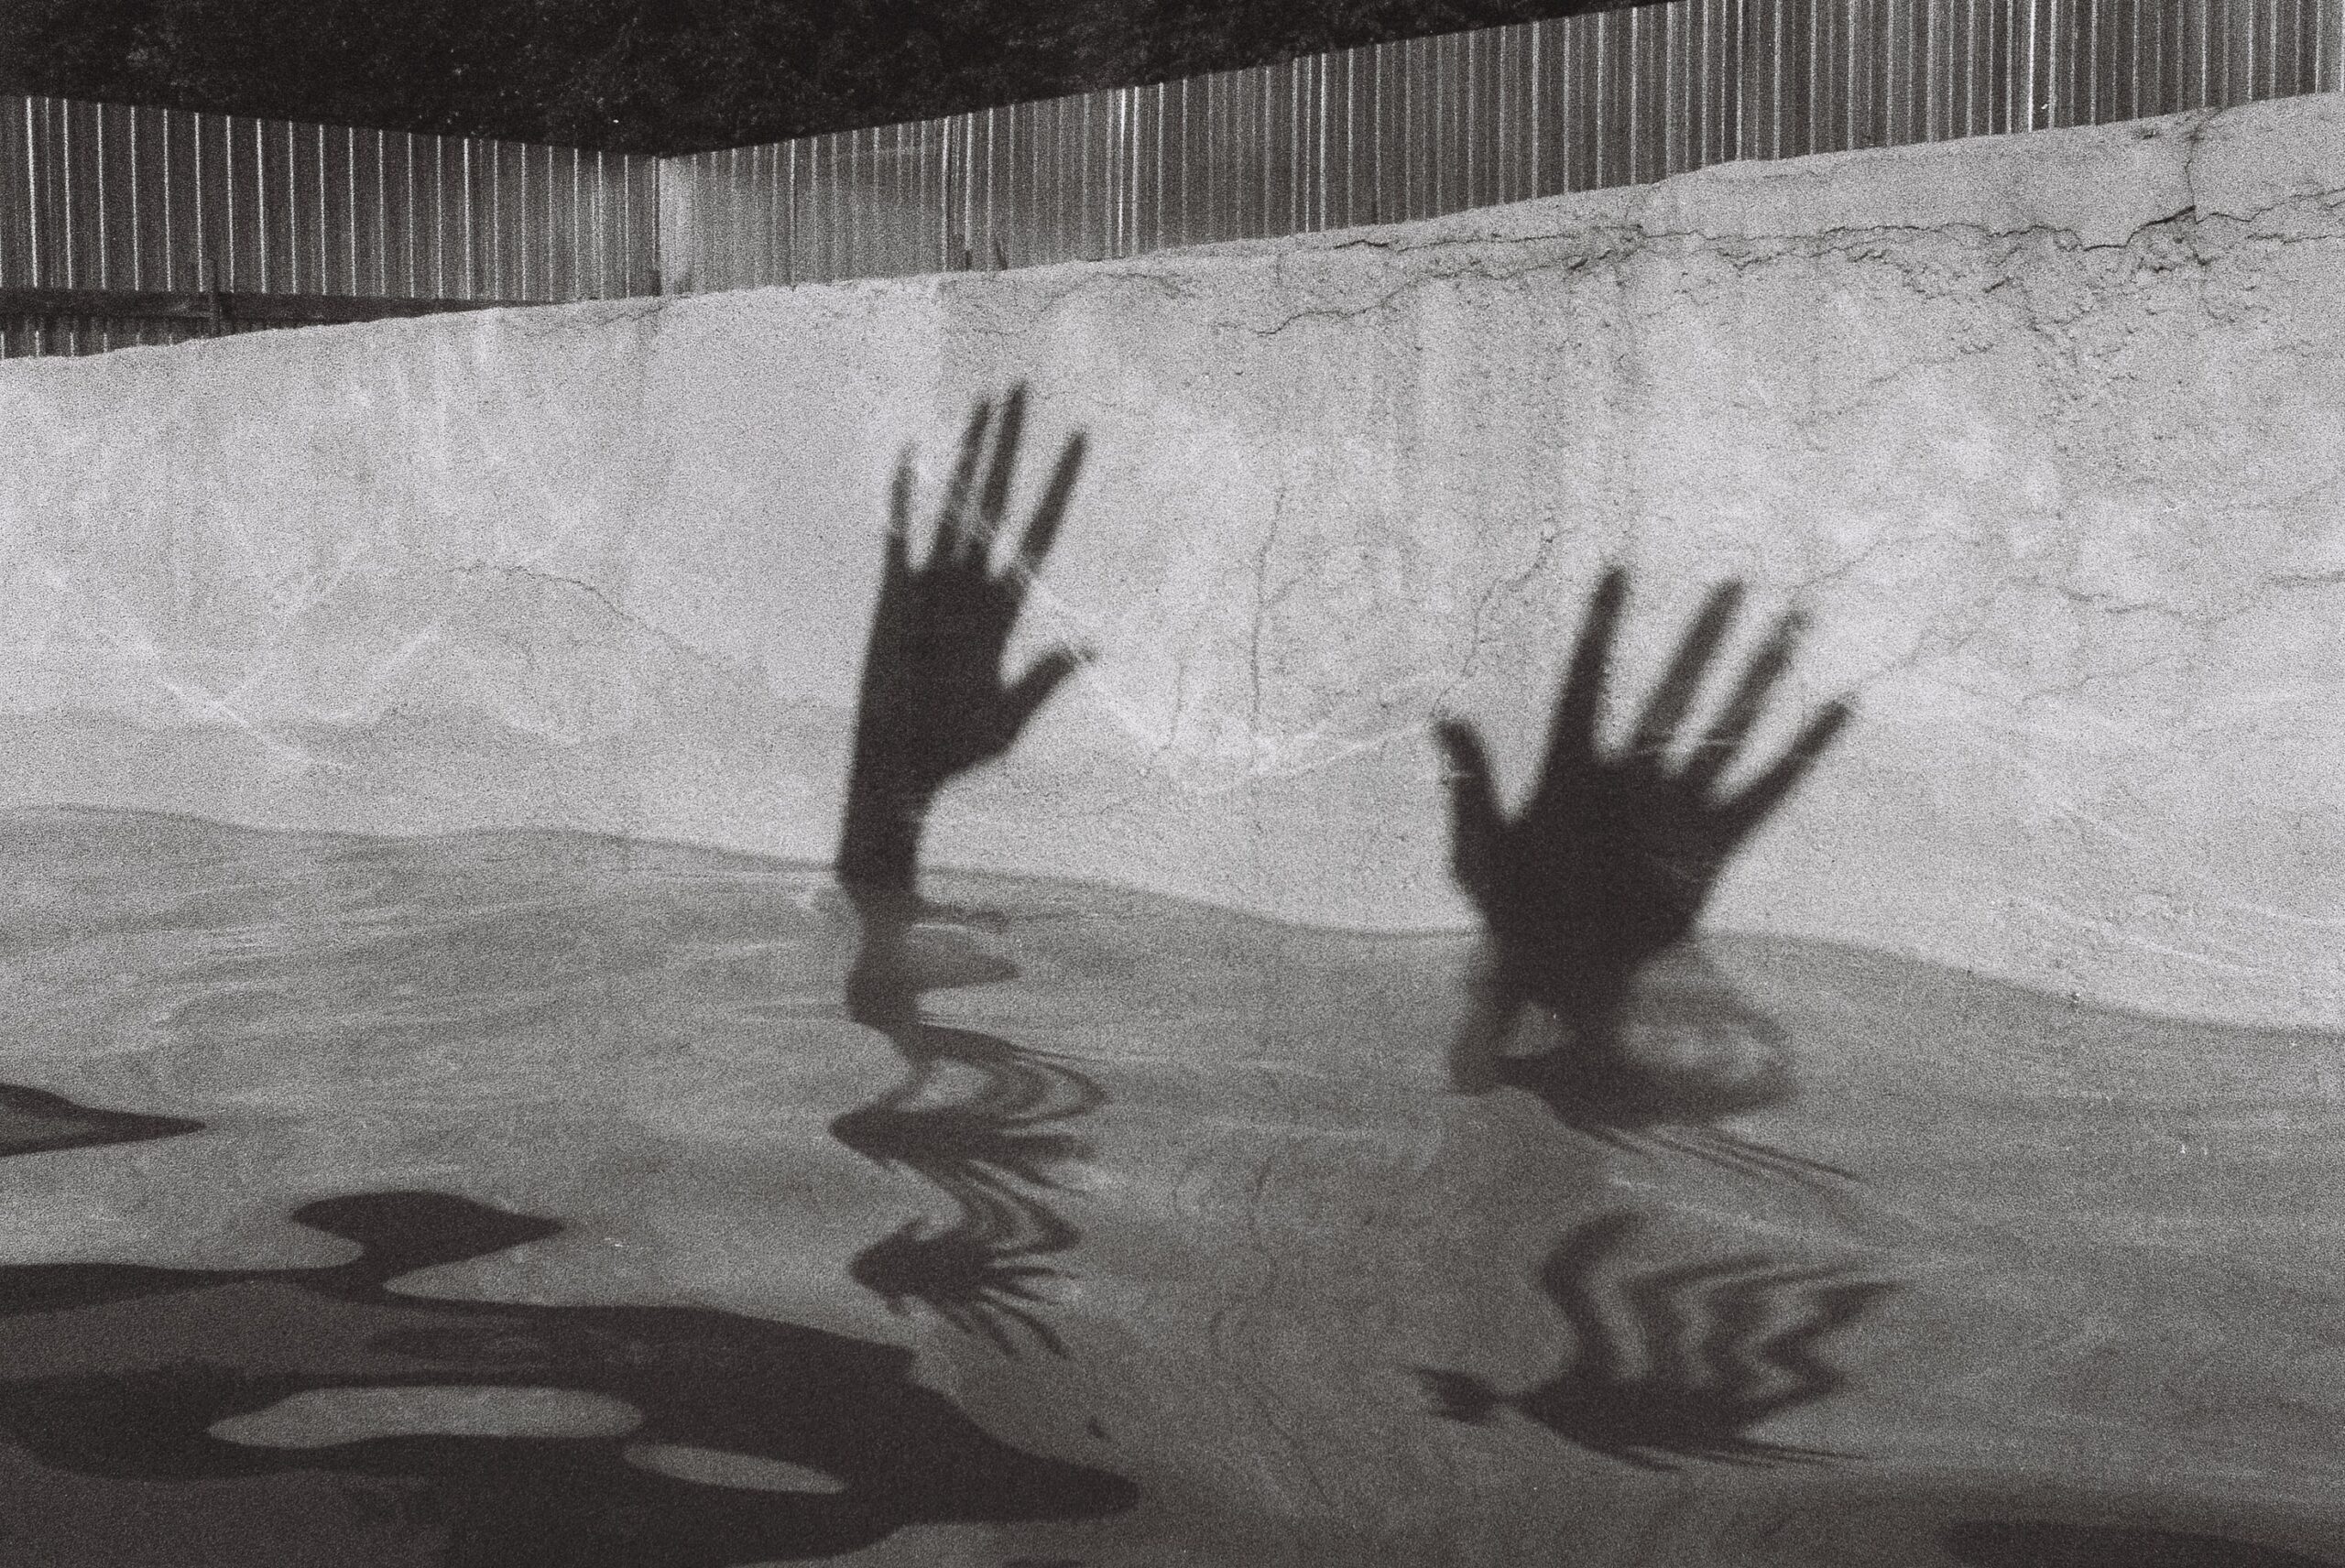 The shadow of two hands rising out of a pool